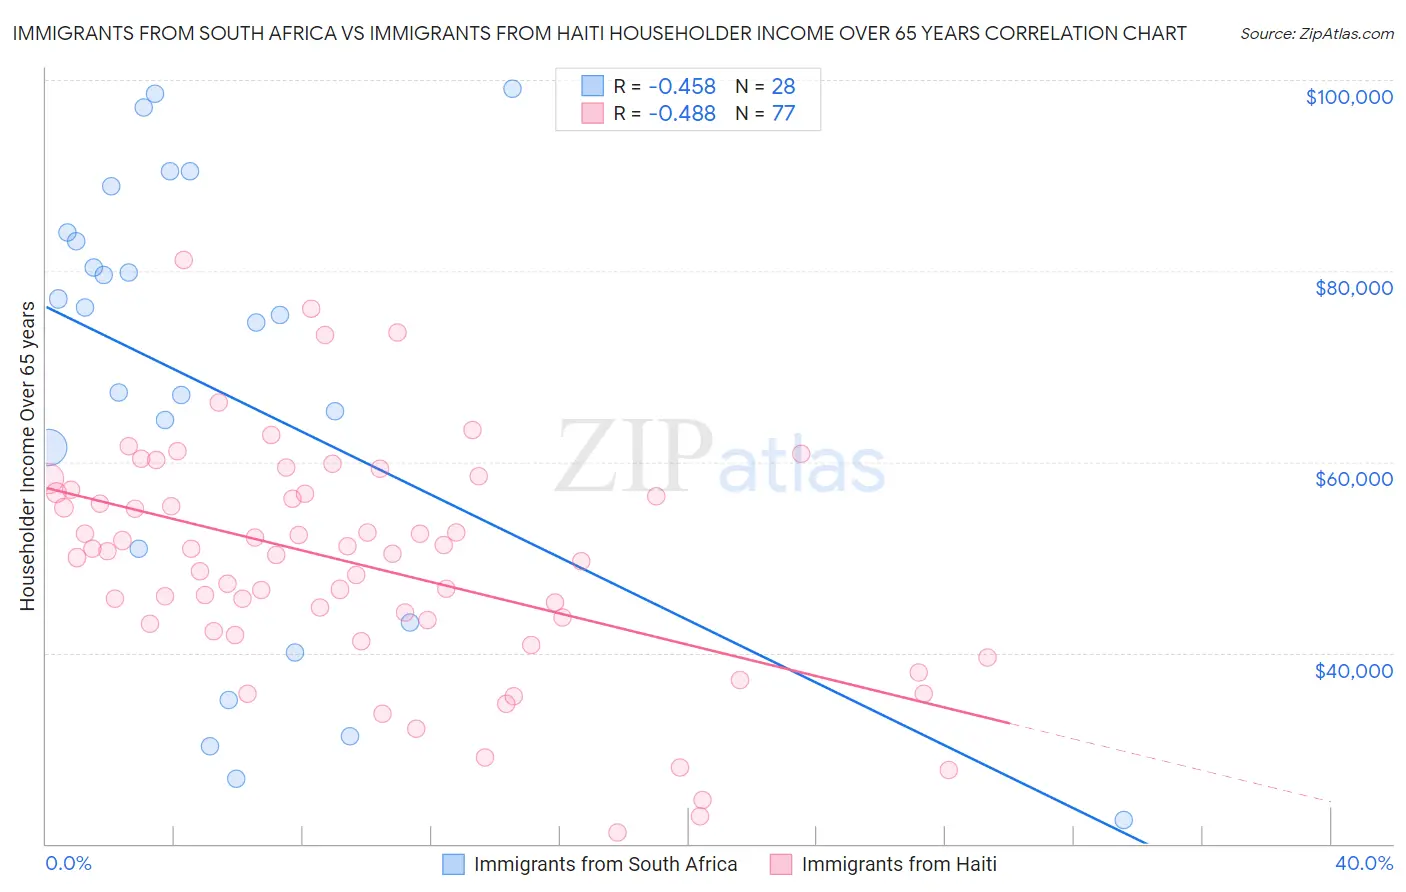 Immigrants from South Africa vs Immigrants from Haiti Householder Income Over 65 years